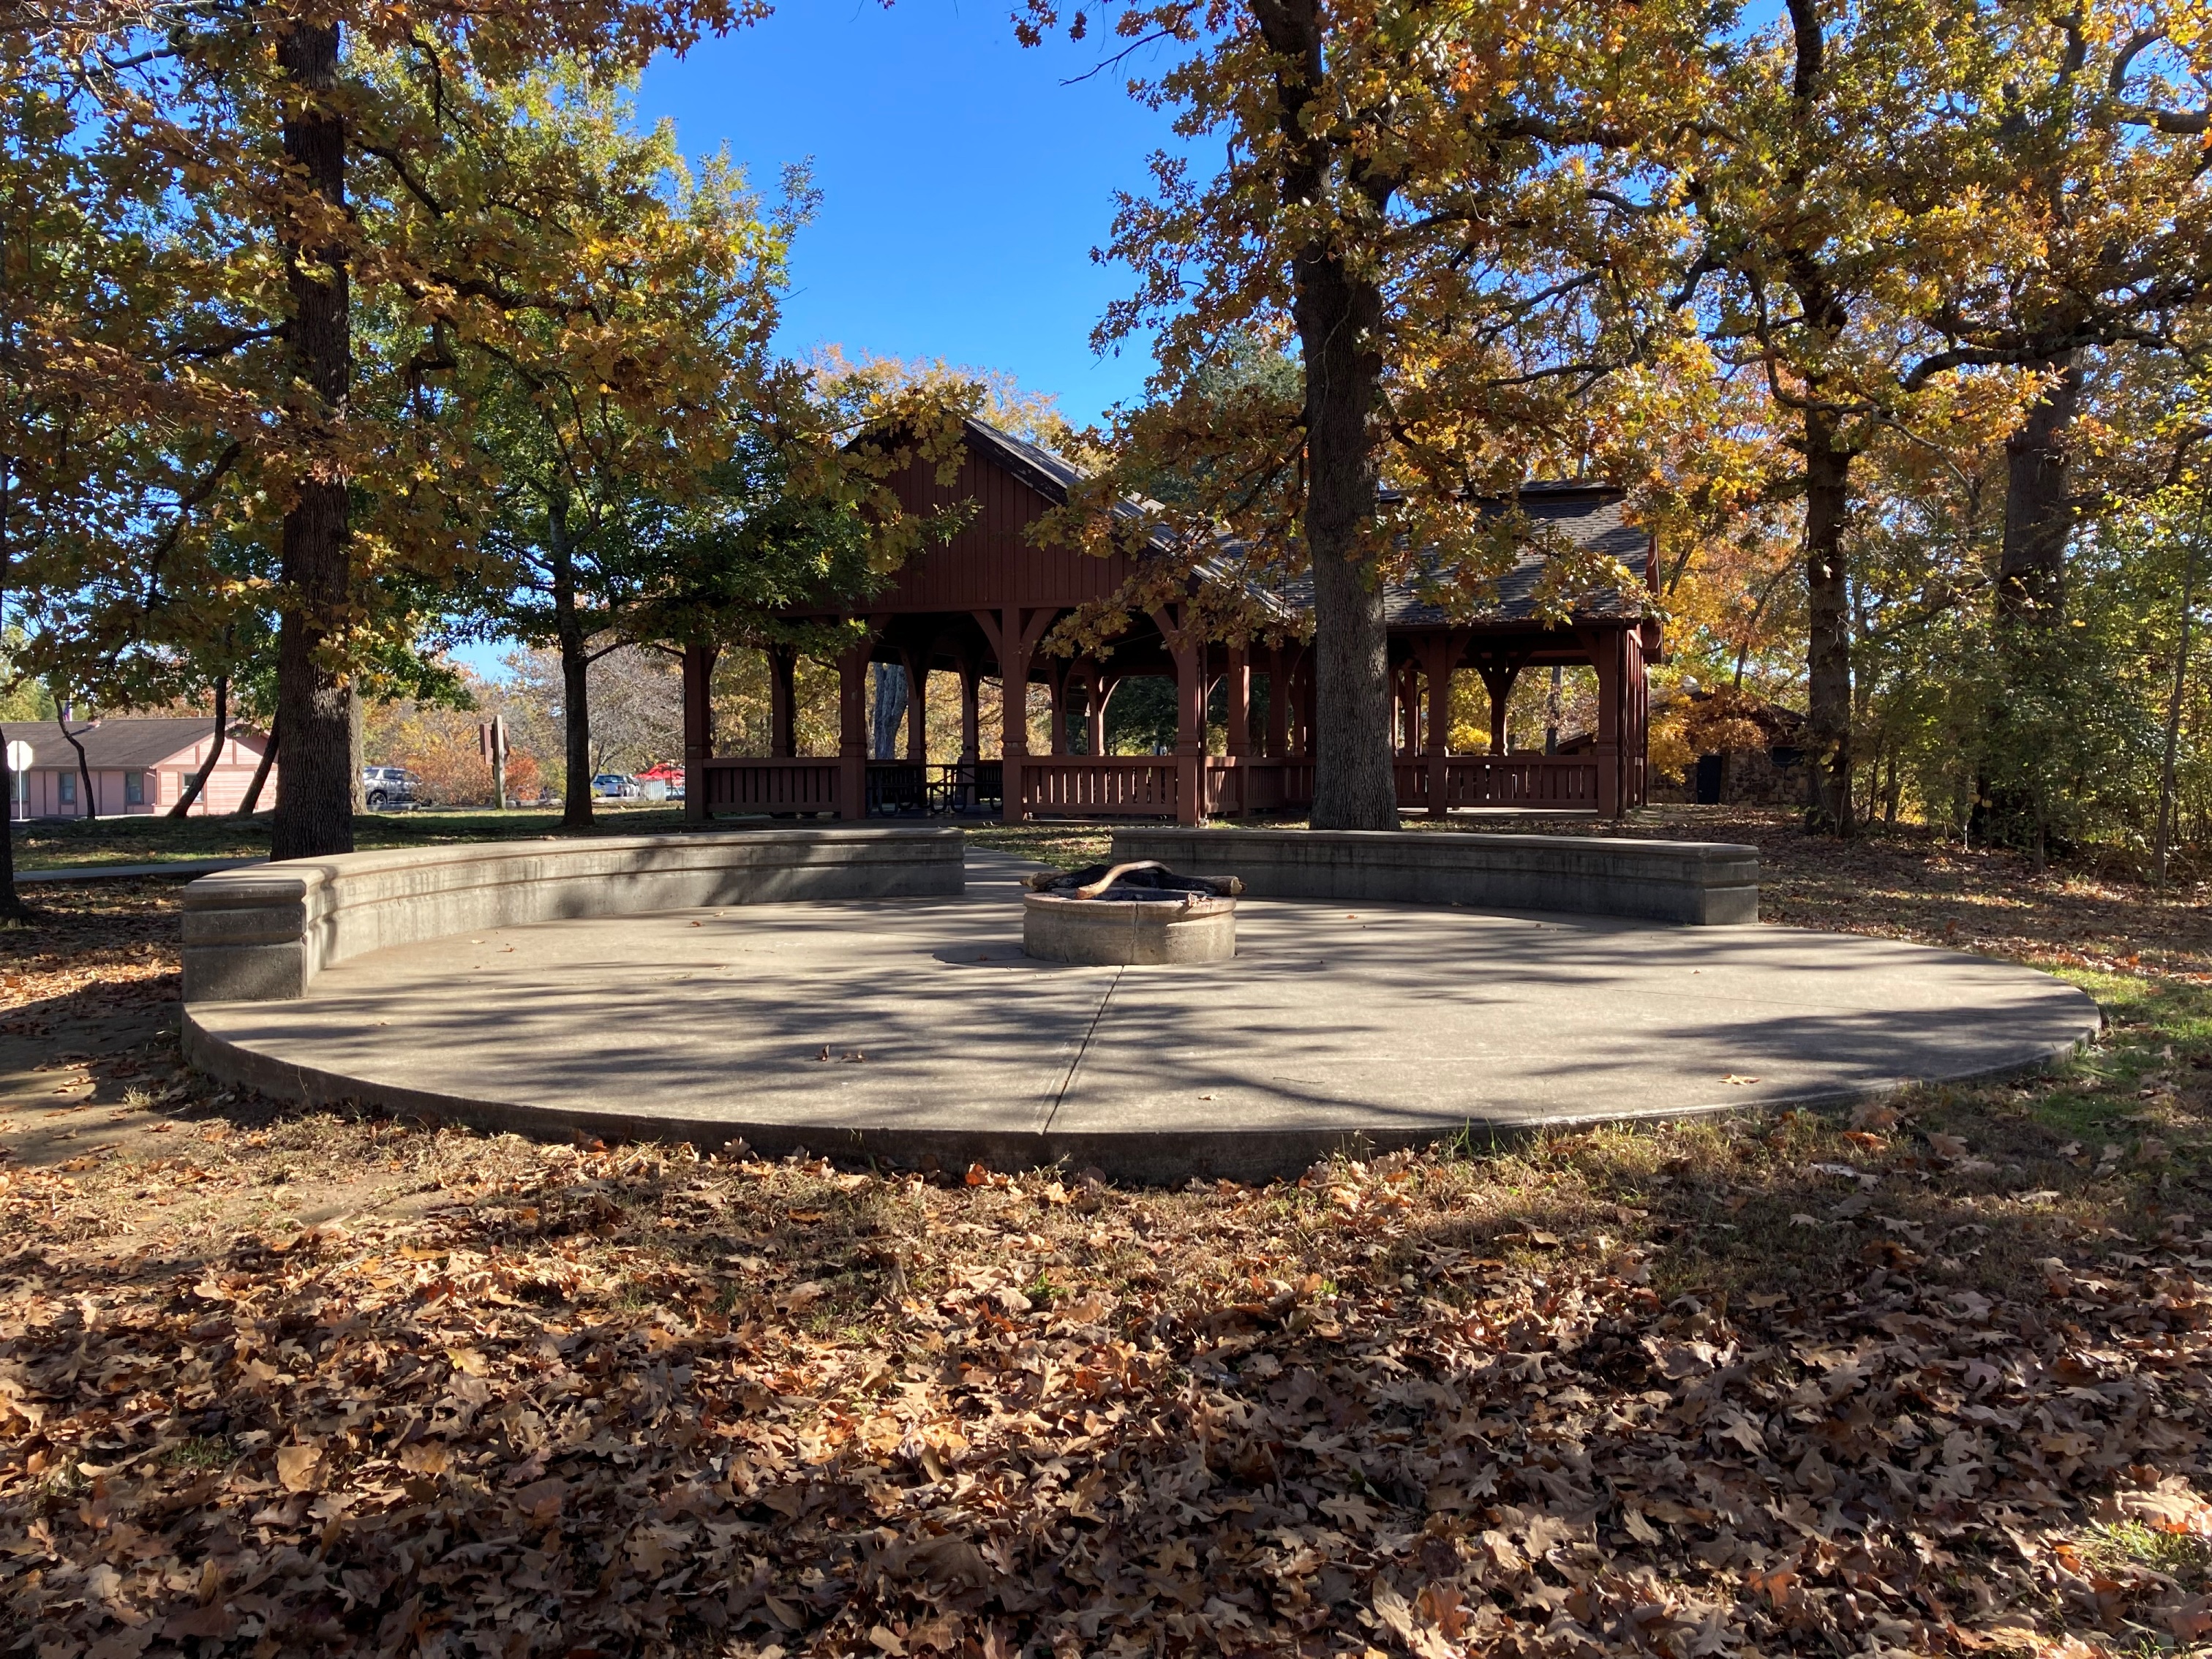 A fire pit sits on a large, circular concrete area near the open picnic shelter.